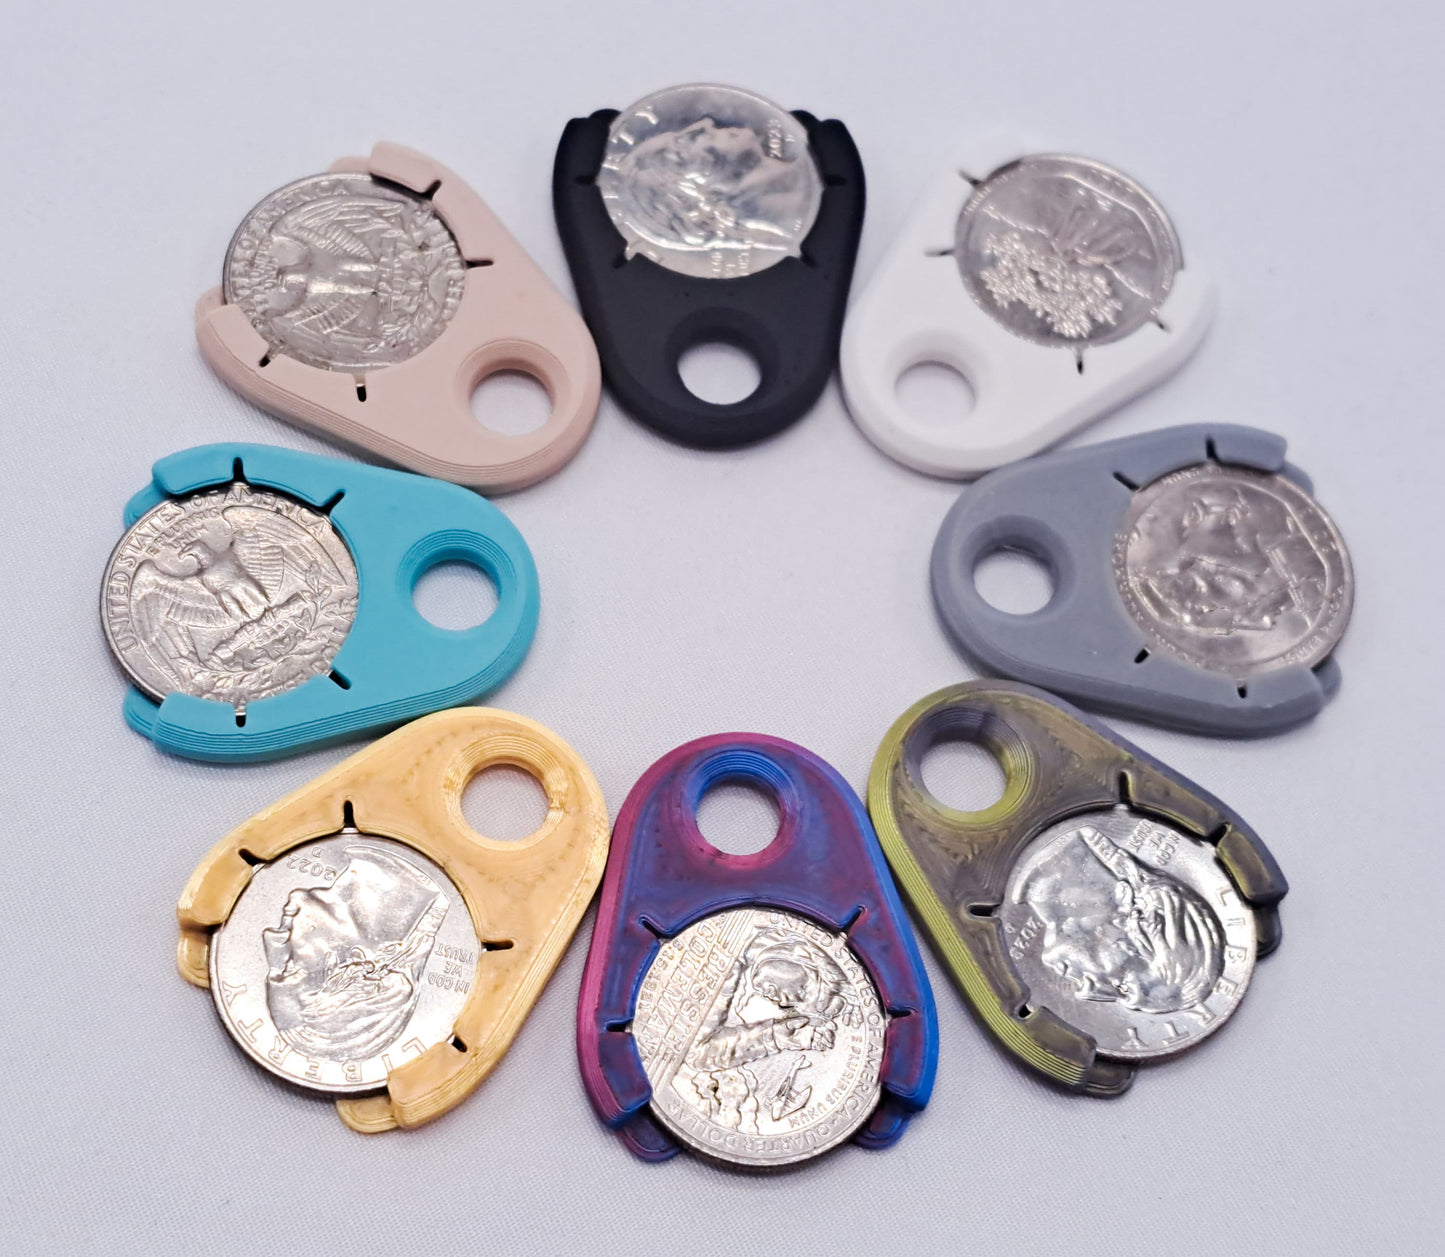 6-Pack Multi-Functional Coin Holder Keychain for Aldi Lidl Carrefour Kaufland Carts & Lottery Scratching